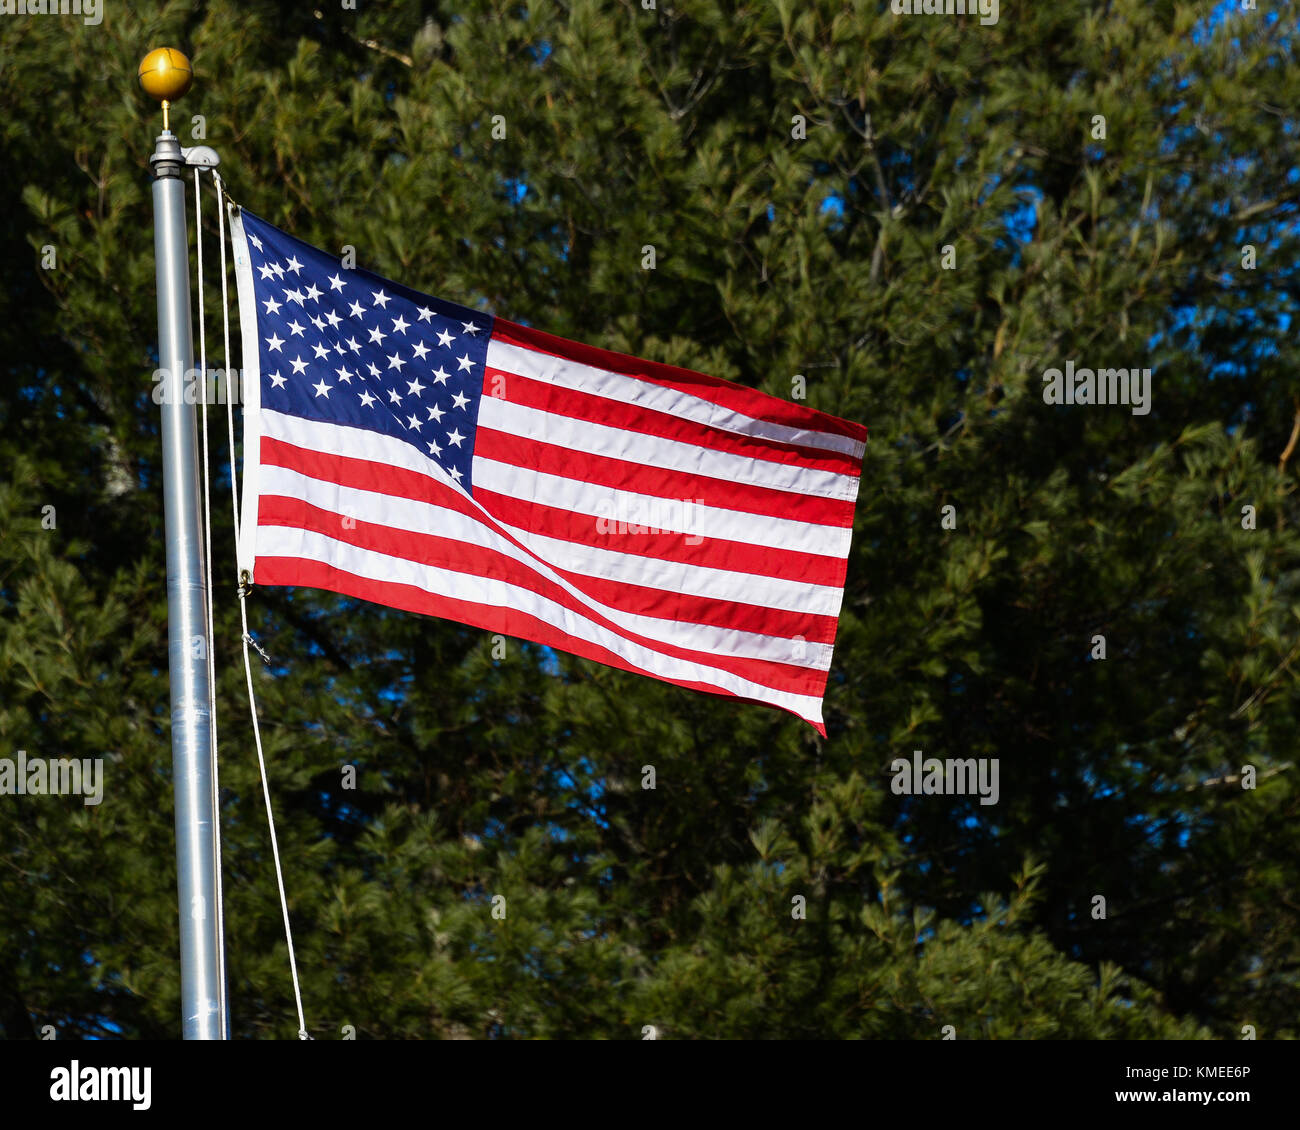 https://c8.alamy.com/comp/KMEE6P/an-american-flag-waving-in-the-breeze-with-a-background-of-evergreen-KMEE6P.jpg